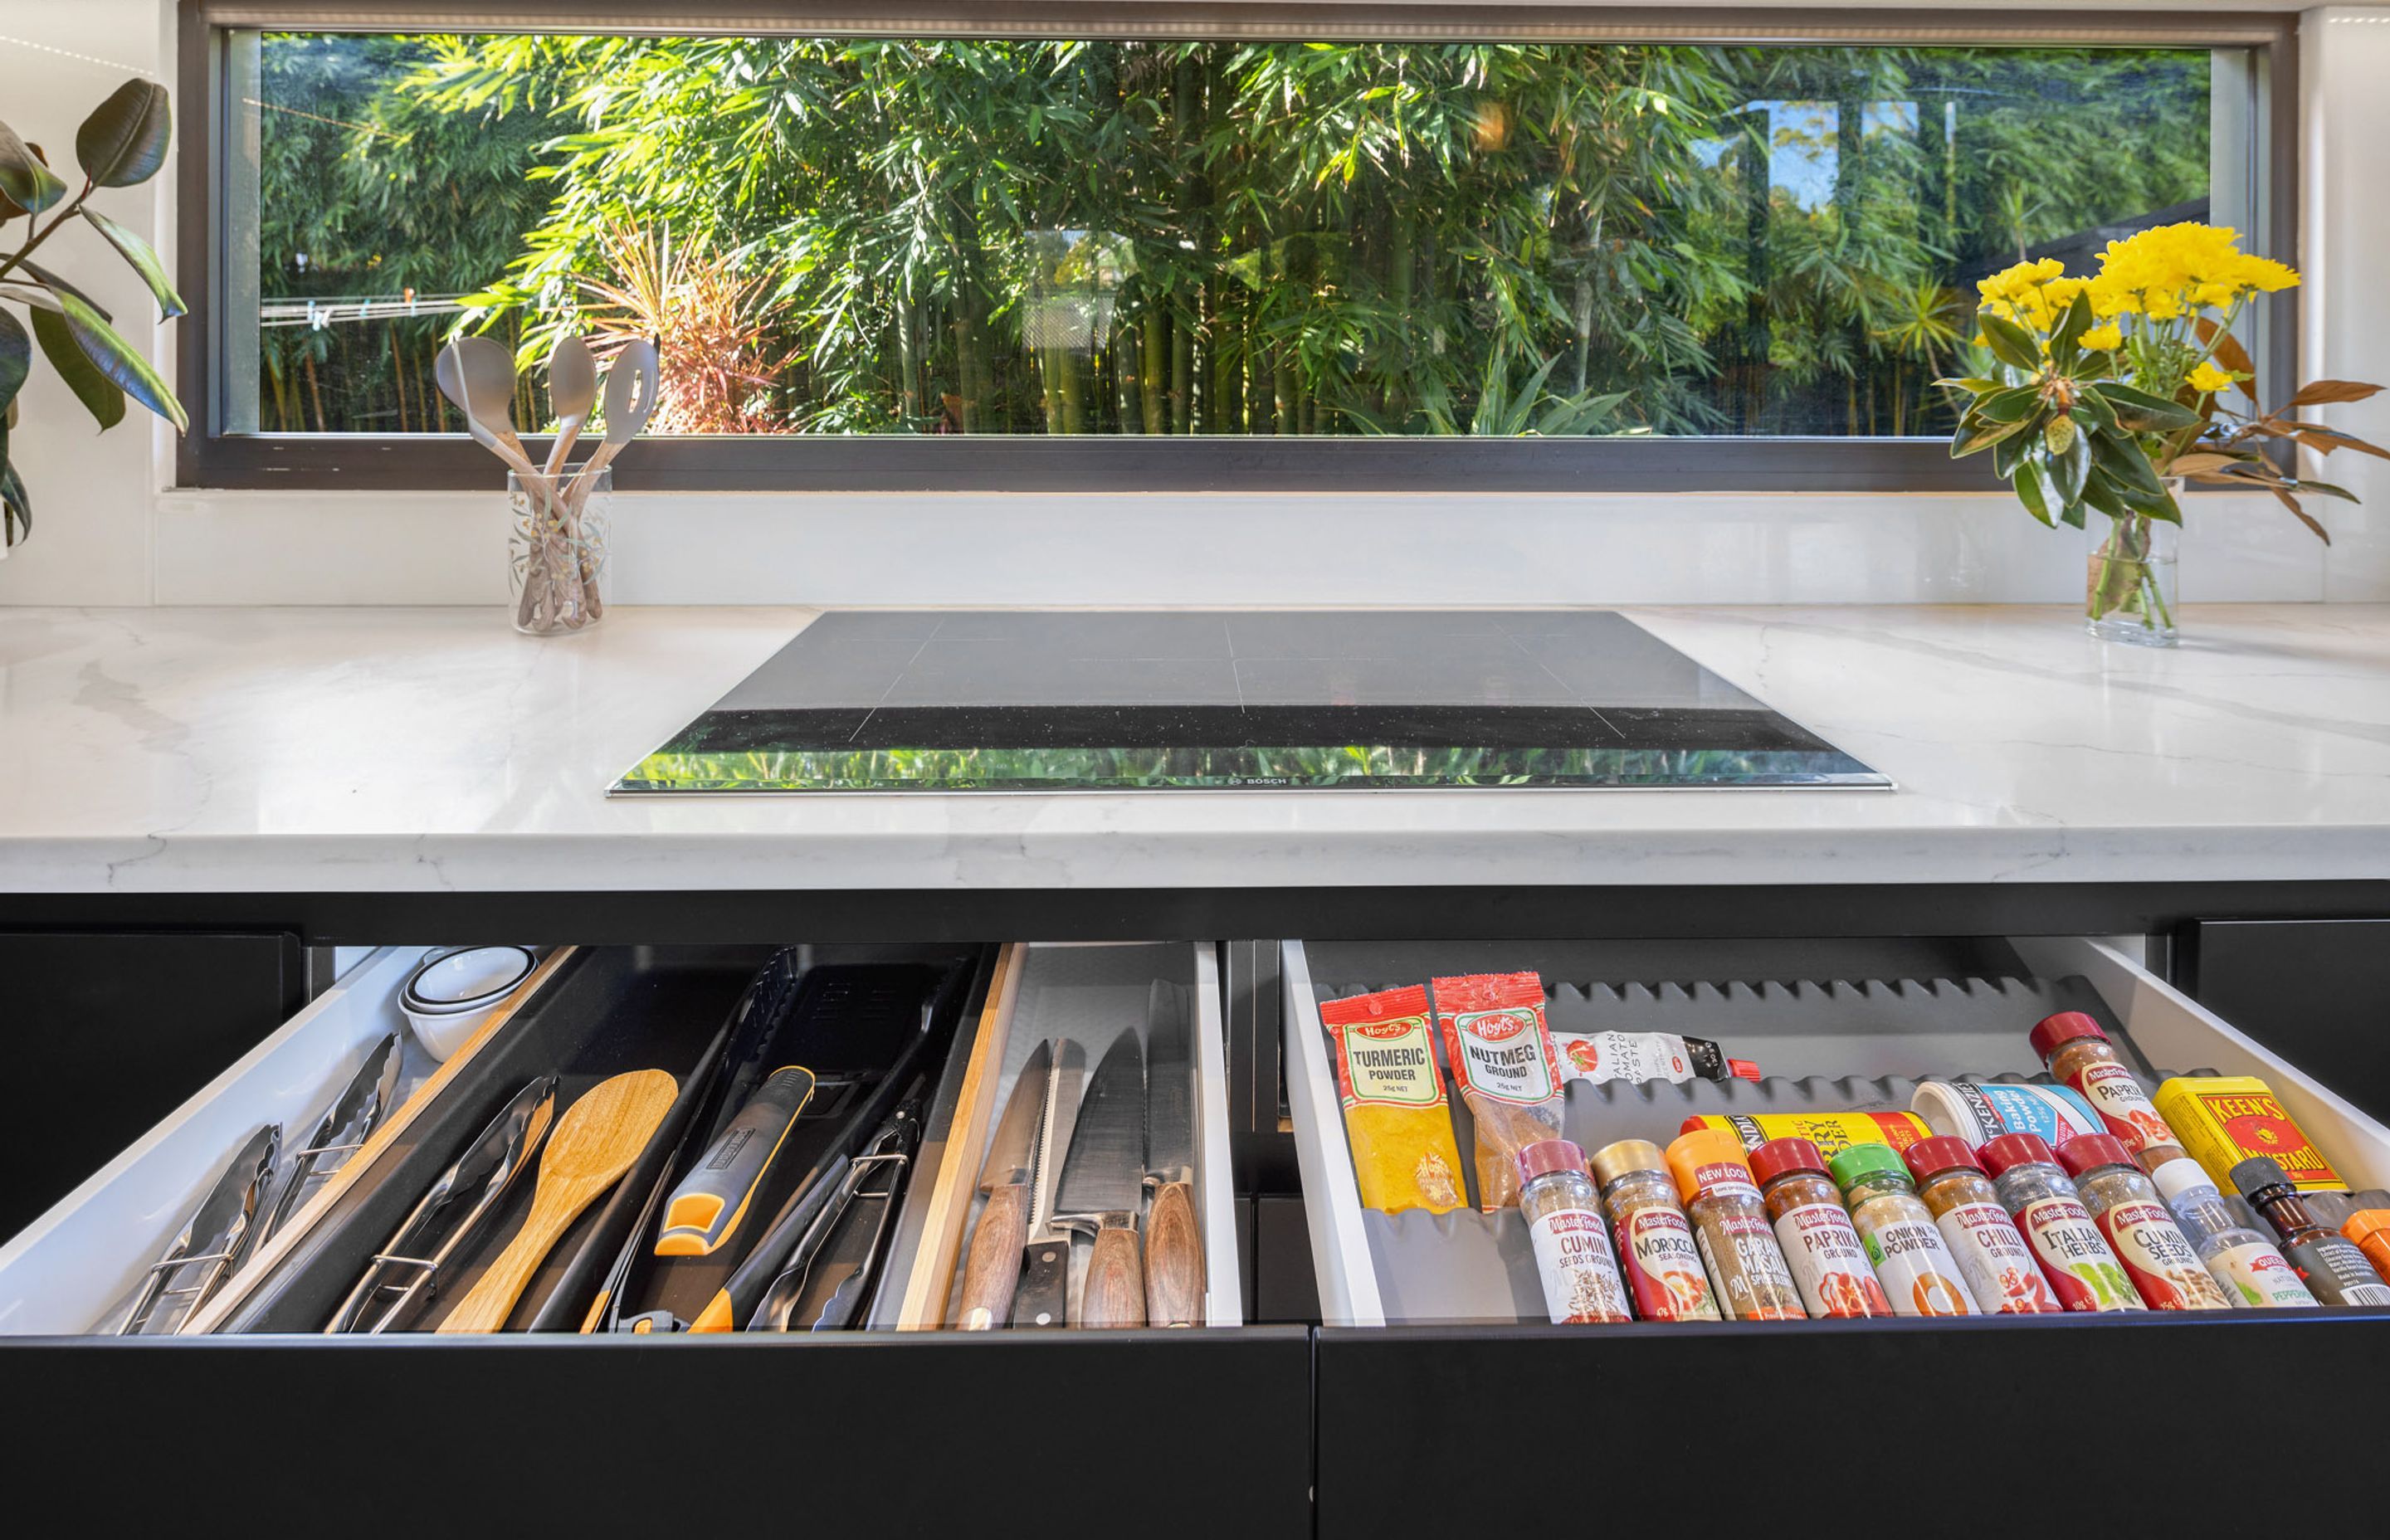 SILENCIO Multi-purpose tray and wooden frame | Salsa spice insert in Anthracite 1300MM X 550MM | Linea cutlery insert 500 / 60 in Anthracite 500-540 | Evostone support bracket  250 x 250MM